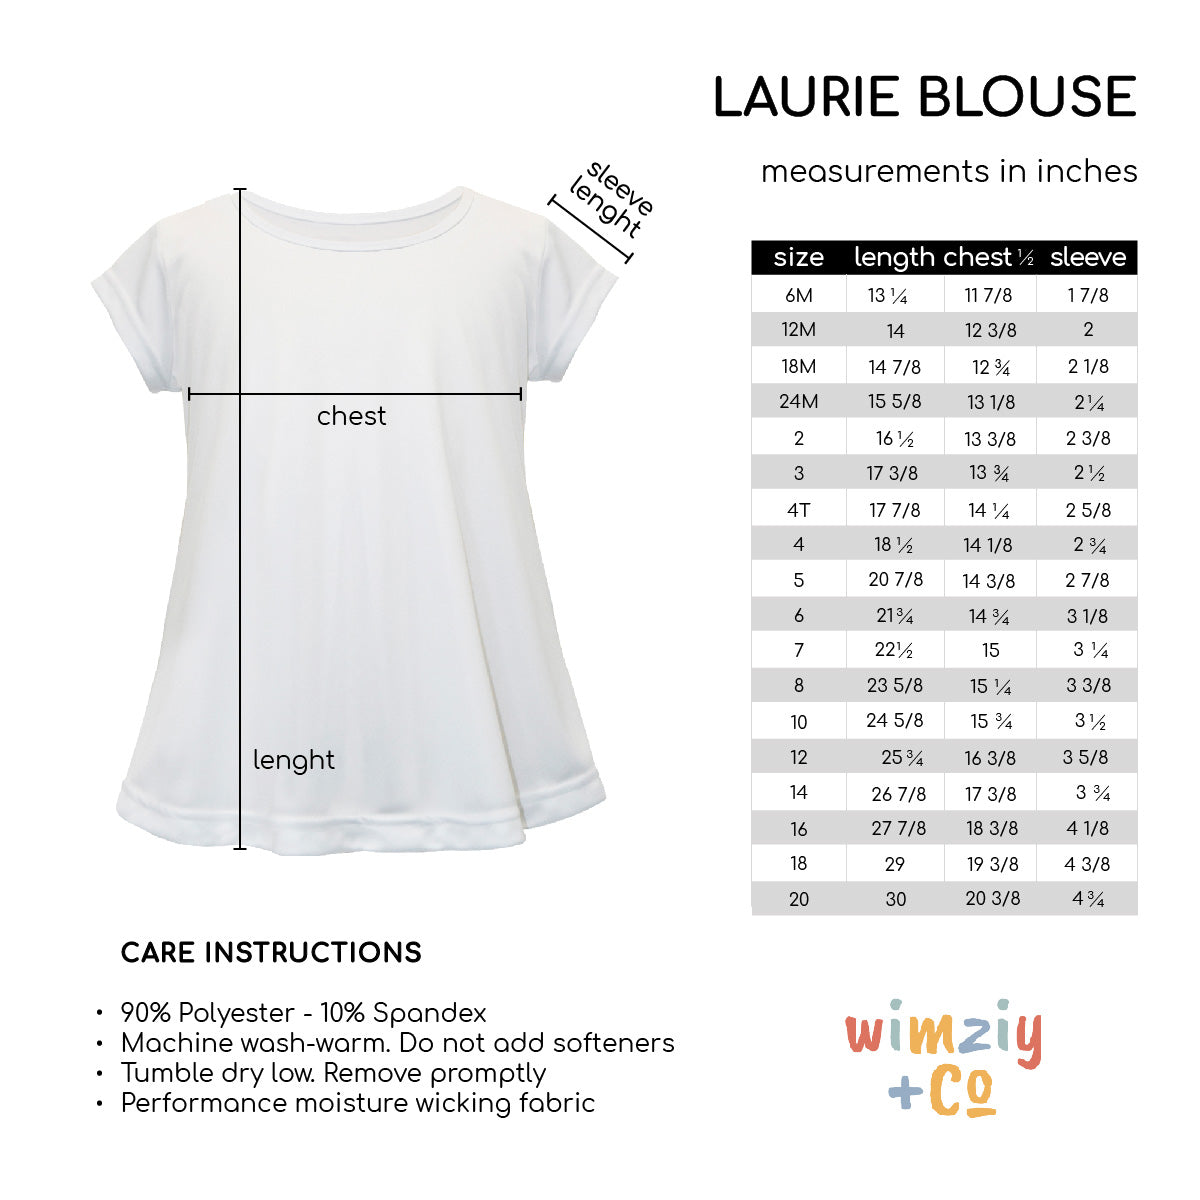 Pitch White Short Sleeve Laurie Top - Wimziy&Co.